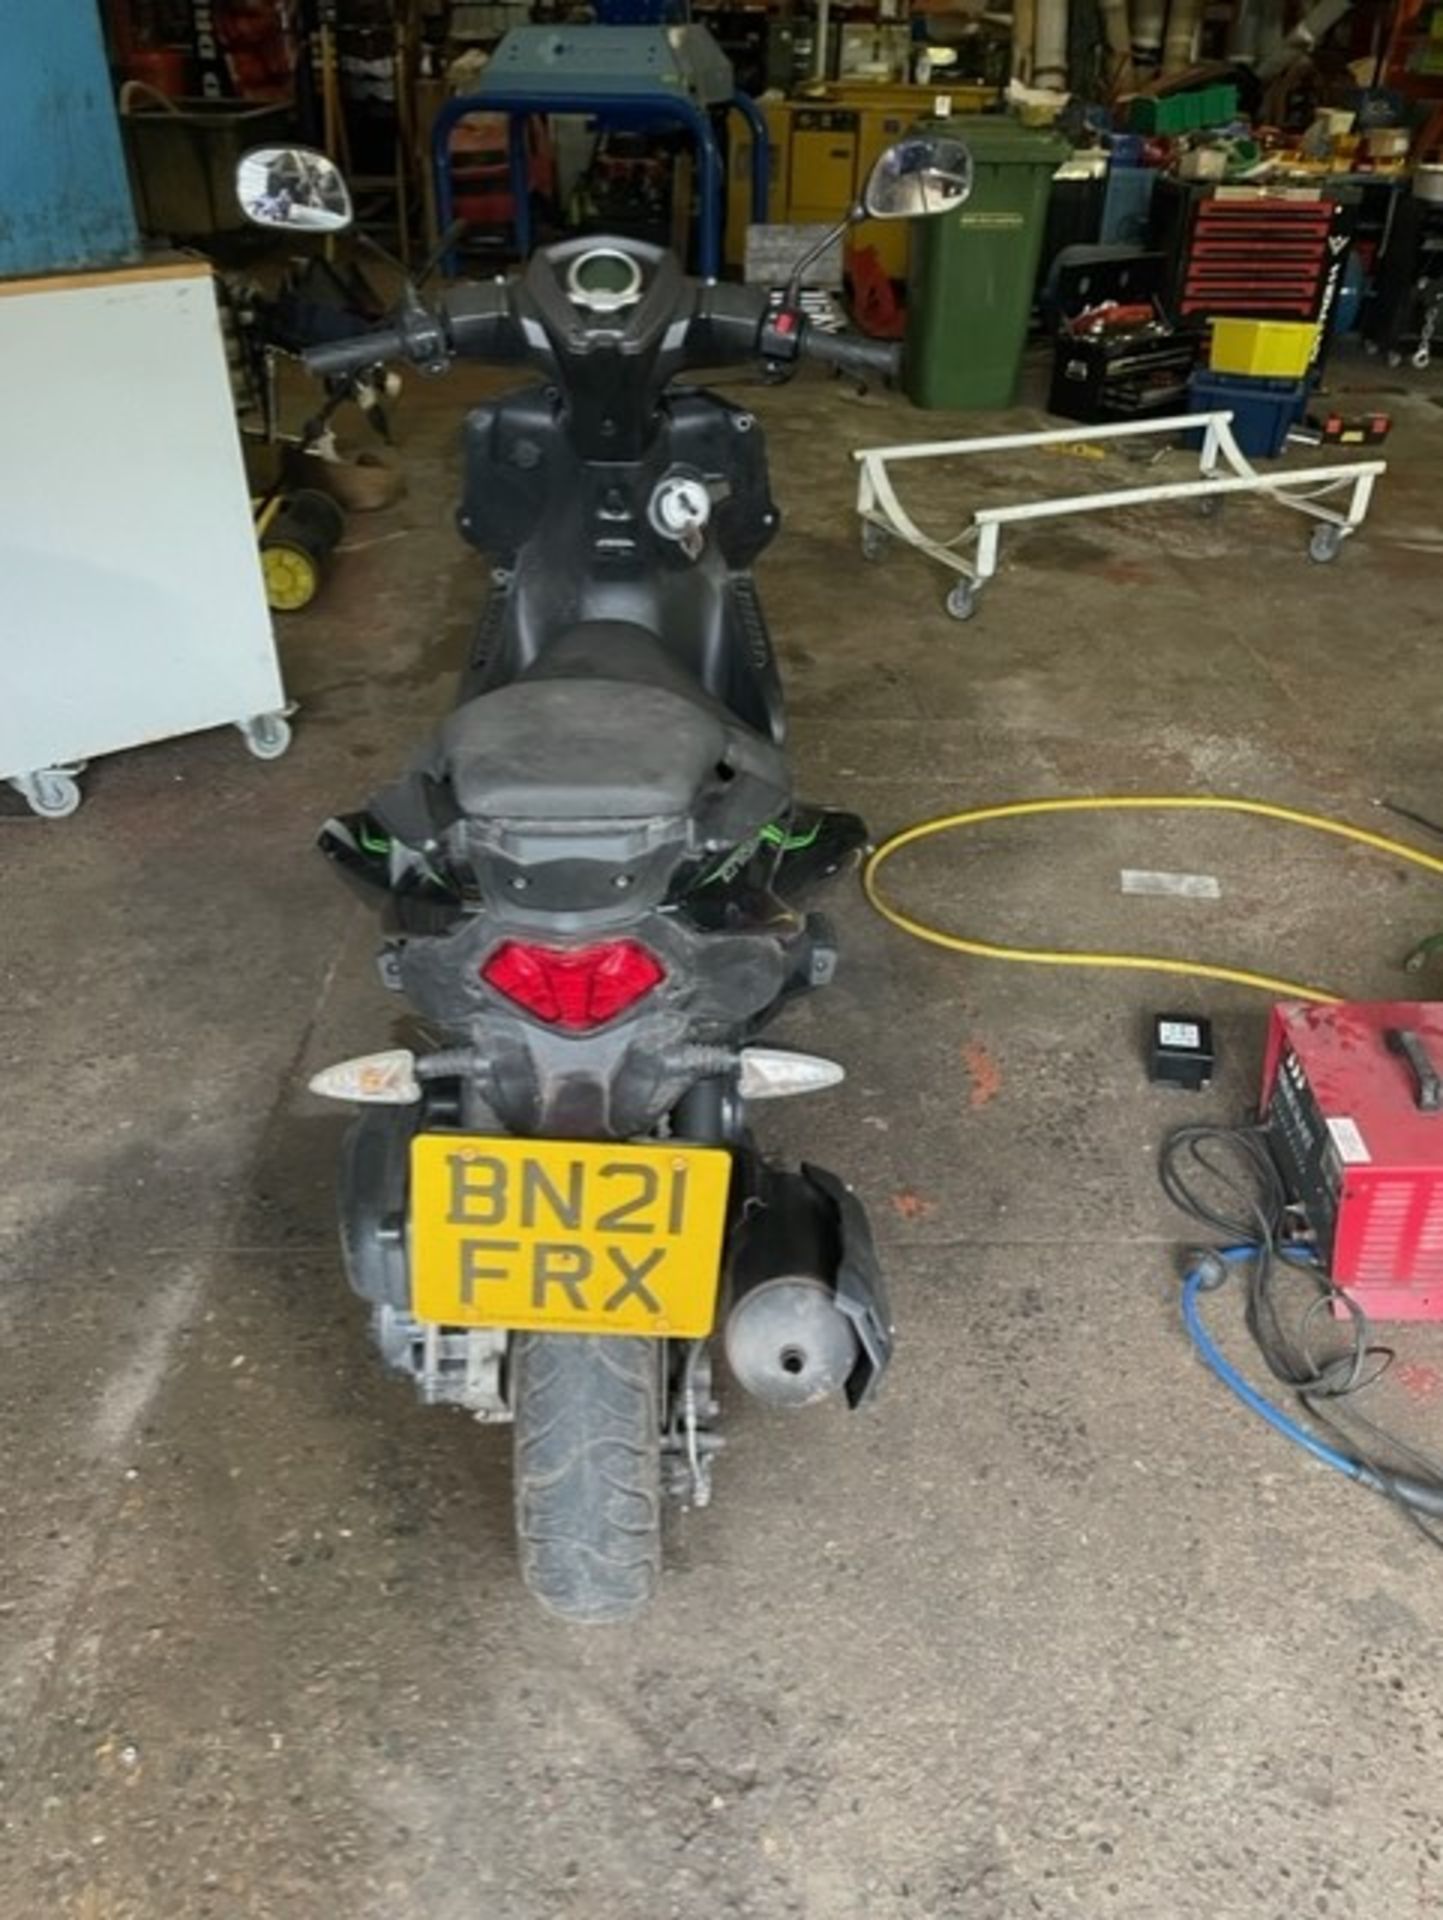 Leximotor 125 scooter it is a crash repair and it’s on a 21 model so still has some test runs as per - Image 2 of 7